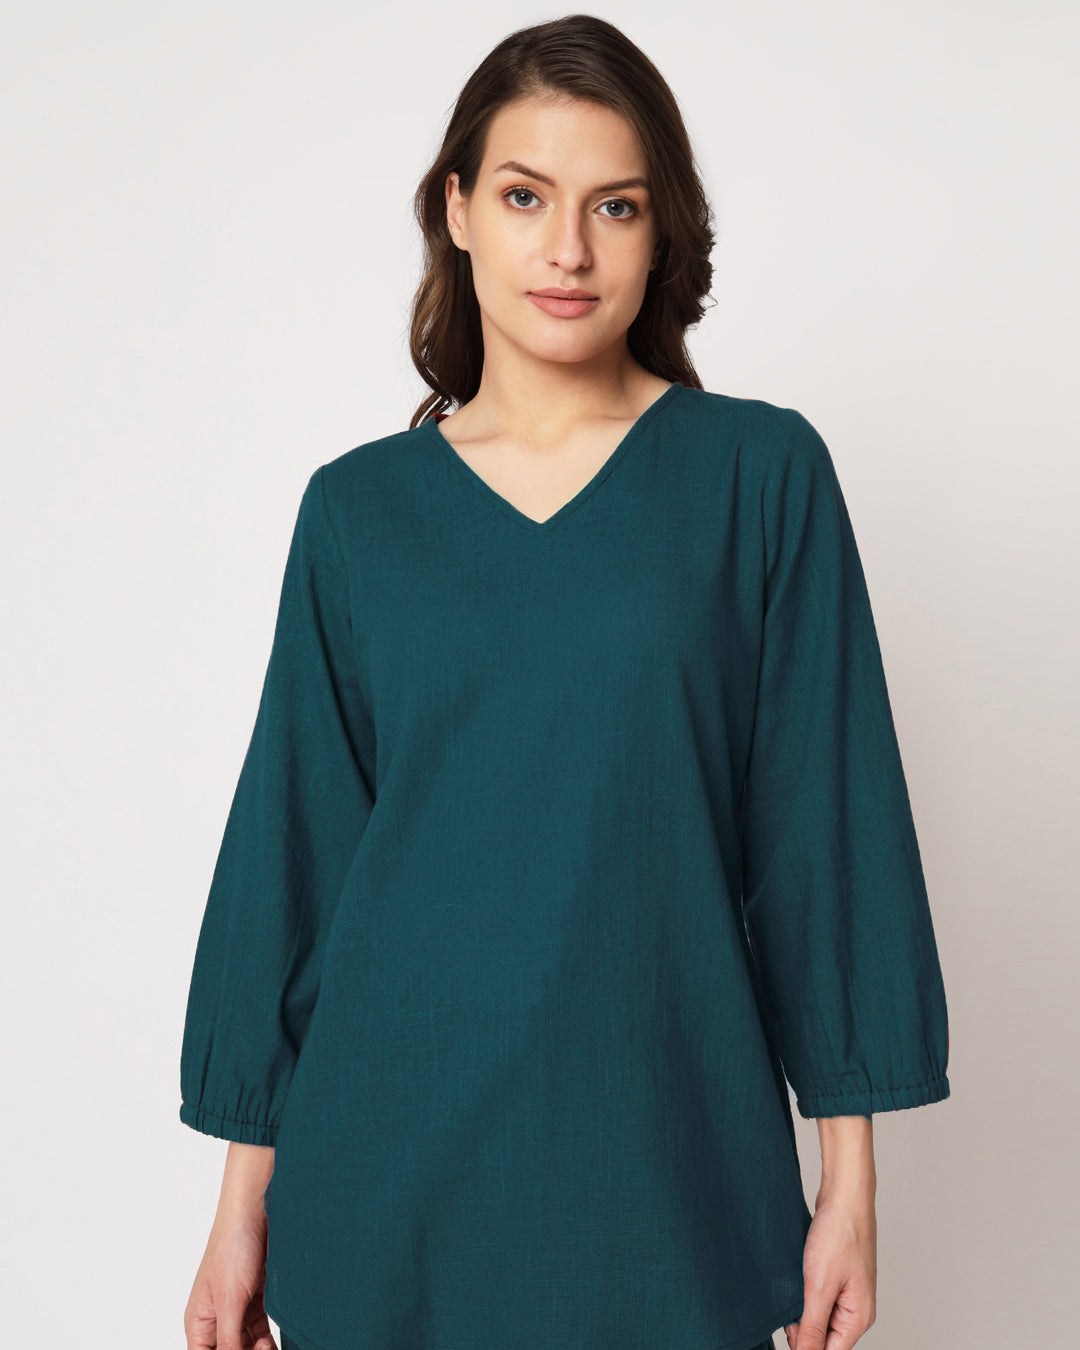 Deep Teal Bishop Sleeves Solid Top (Without Bottoms)